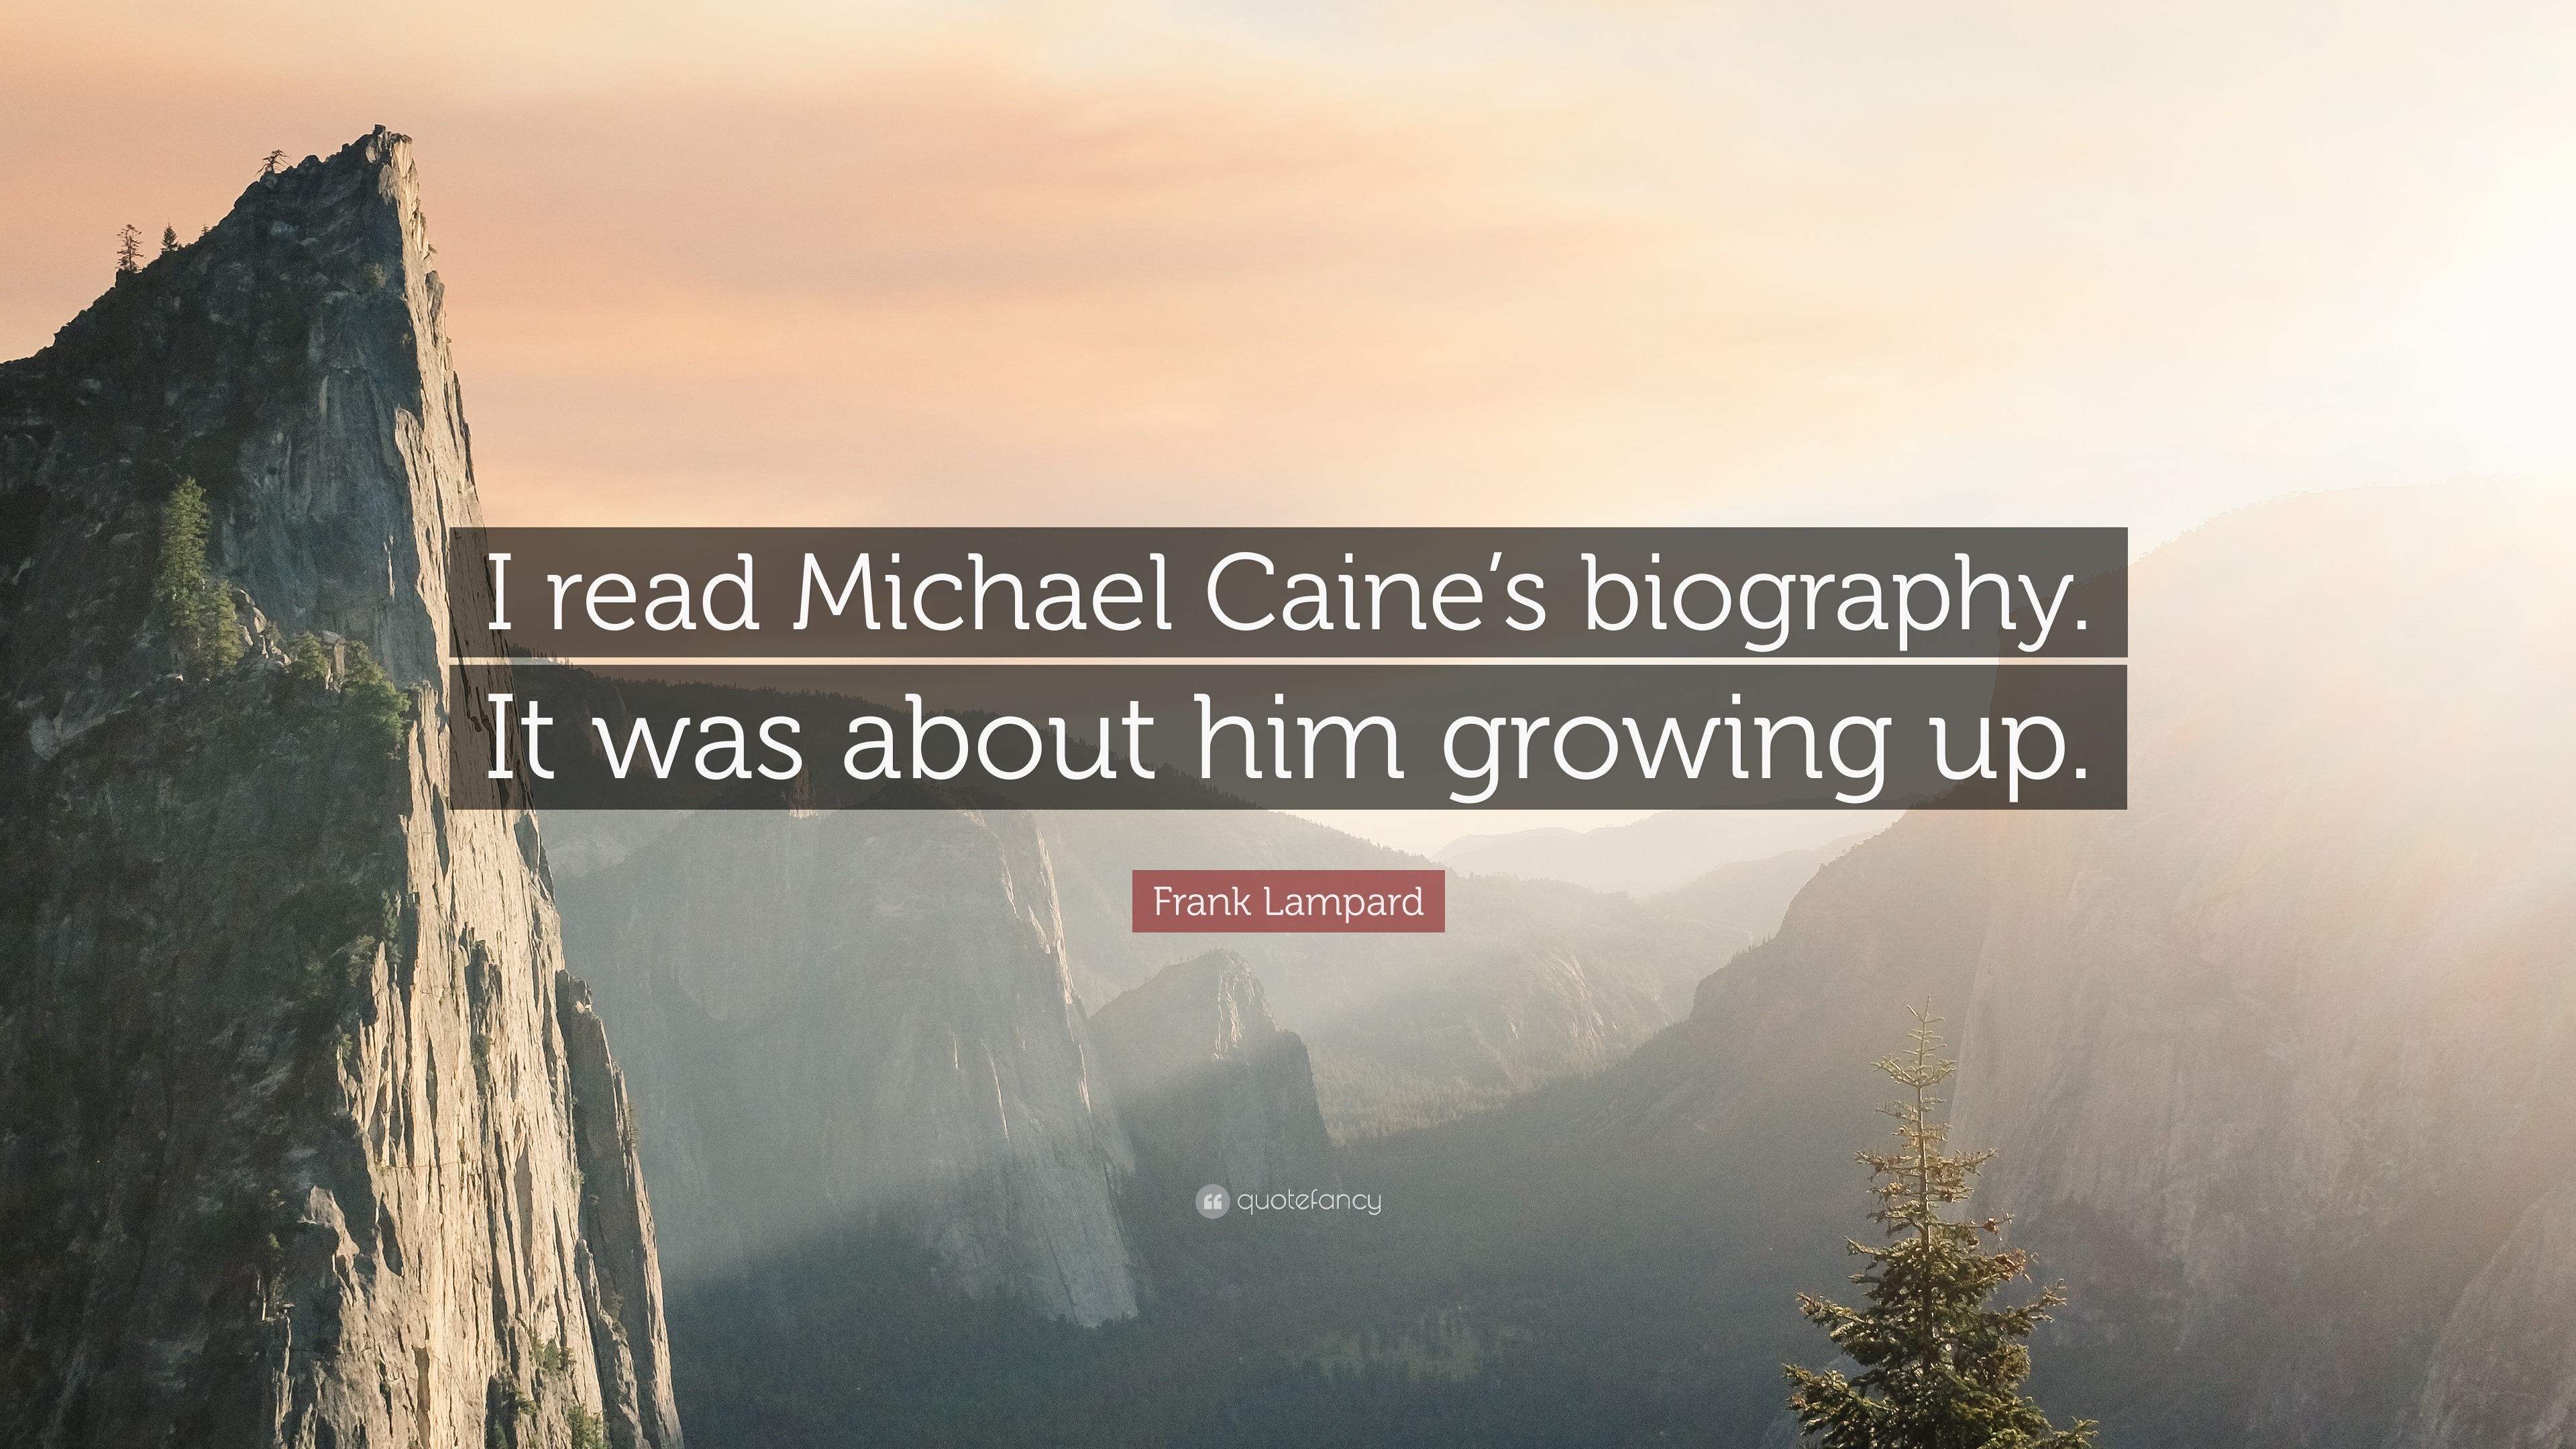 Michael Caine - Biography